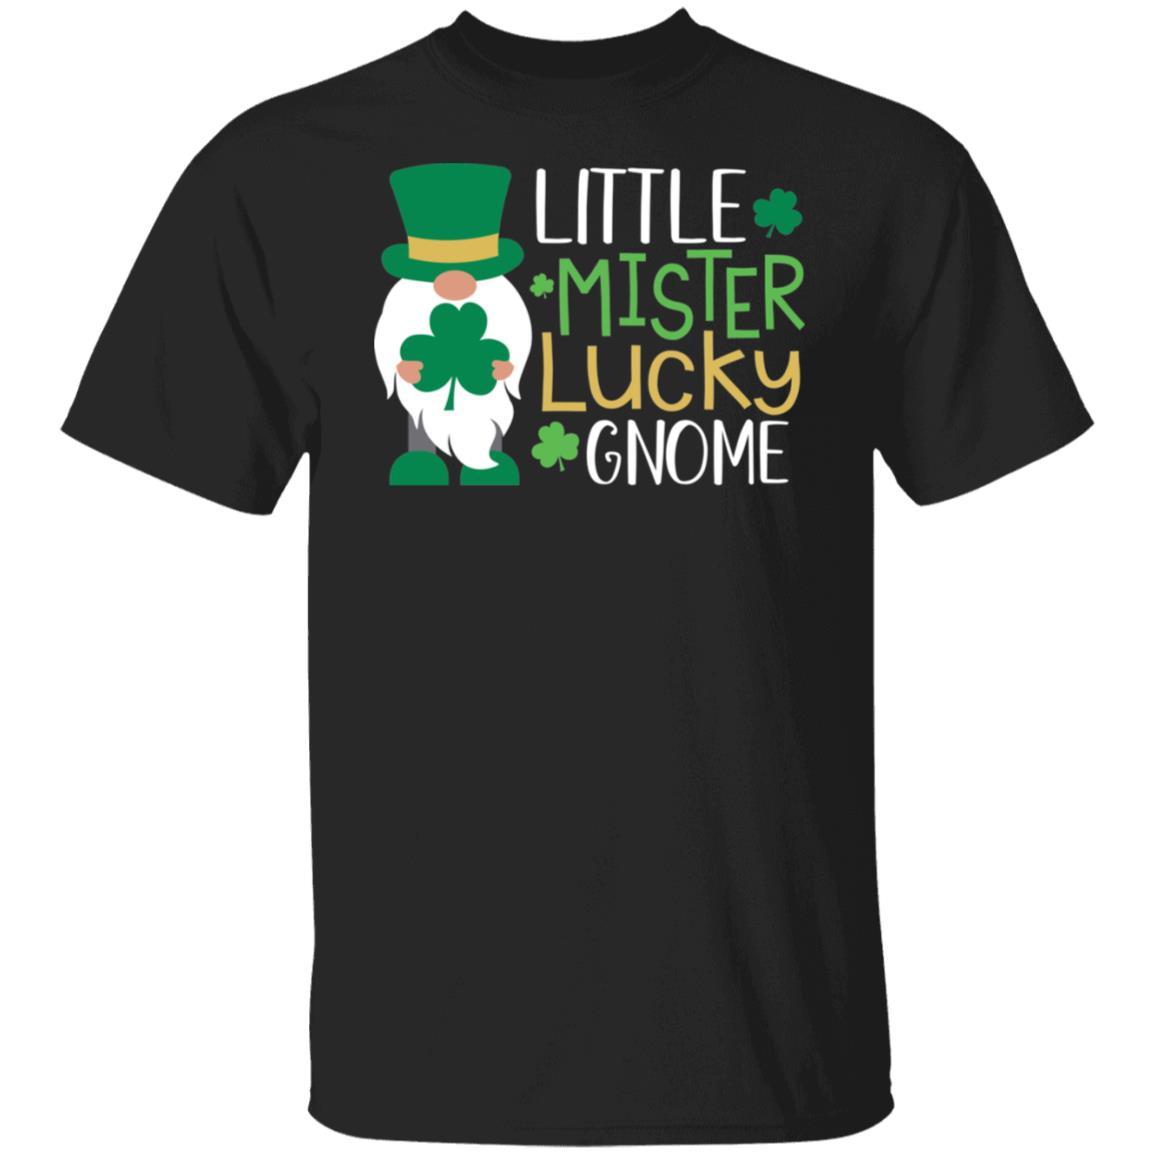 Little Mister Lucky Gnome Funny Shirt